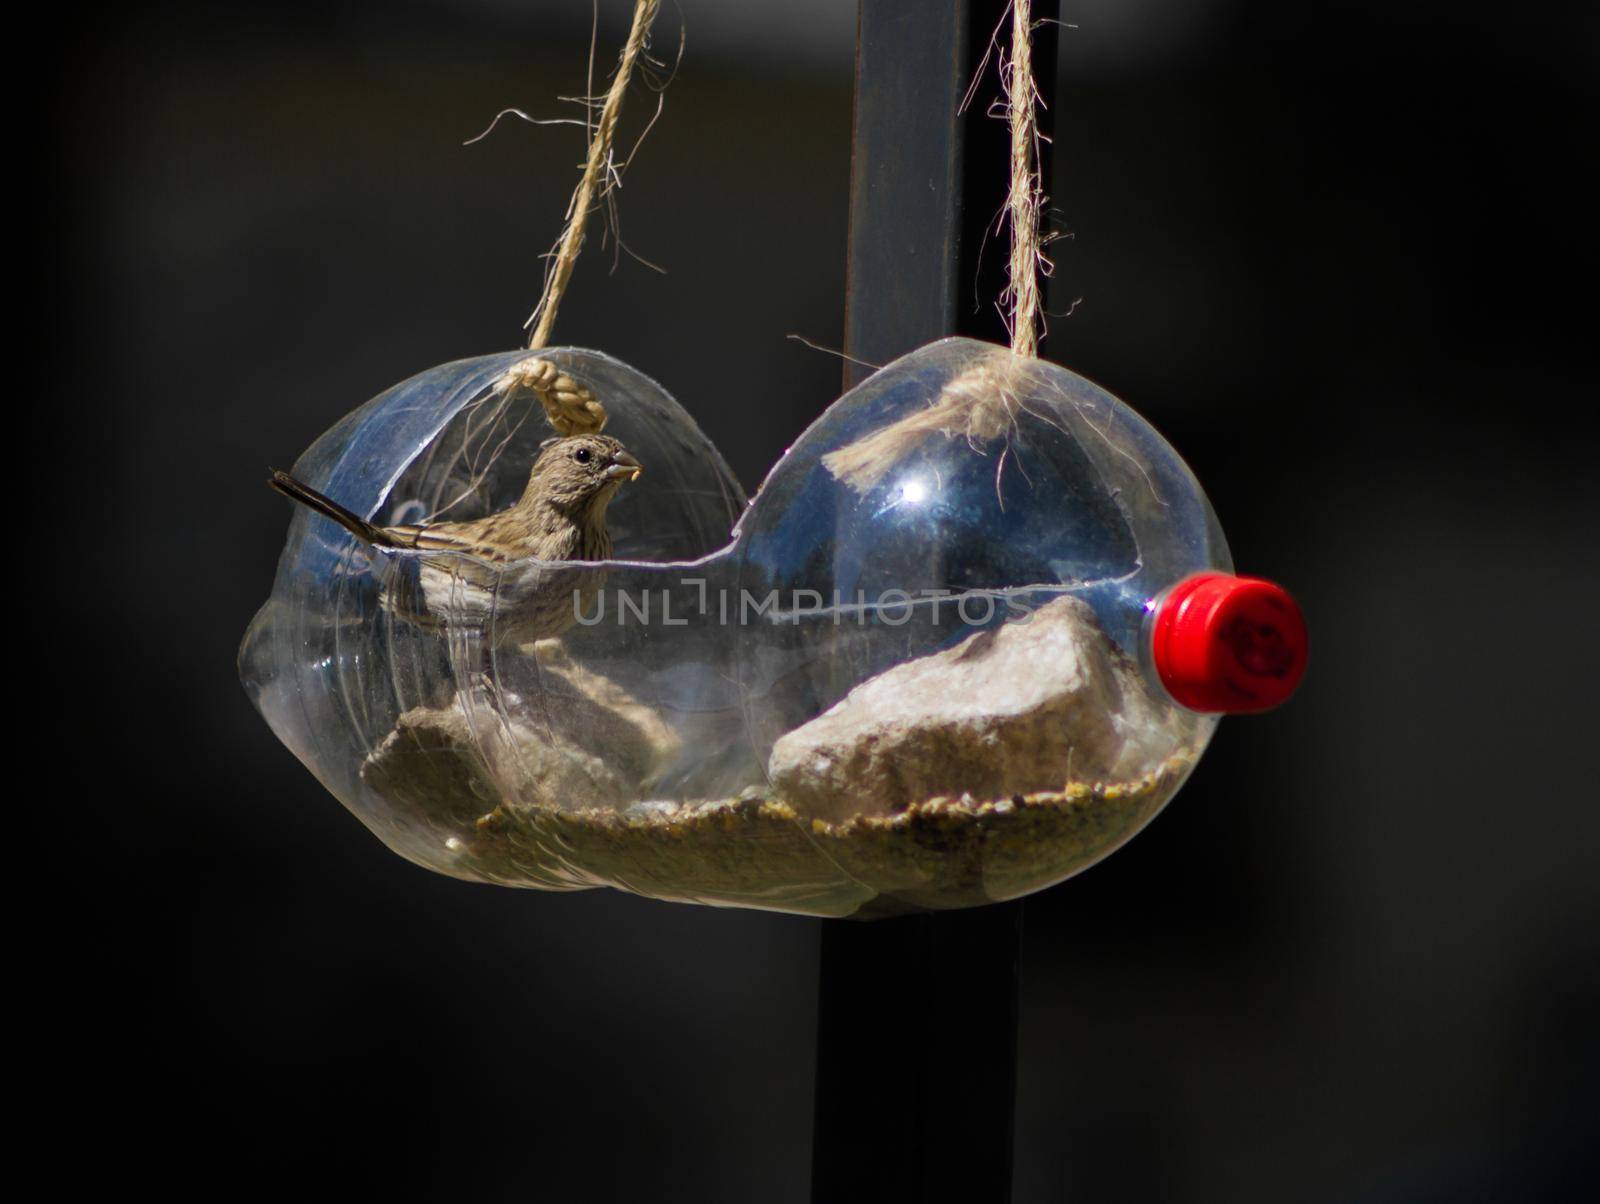 a bird eating at the bird feeder made from a recycled soda bottle by GabrielaBertolini